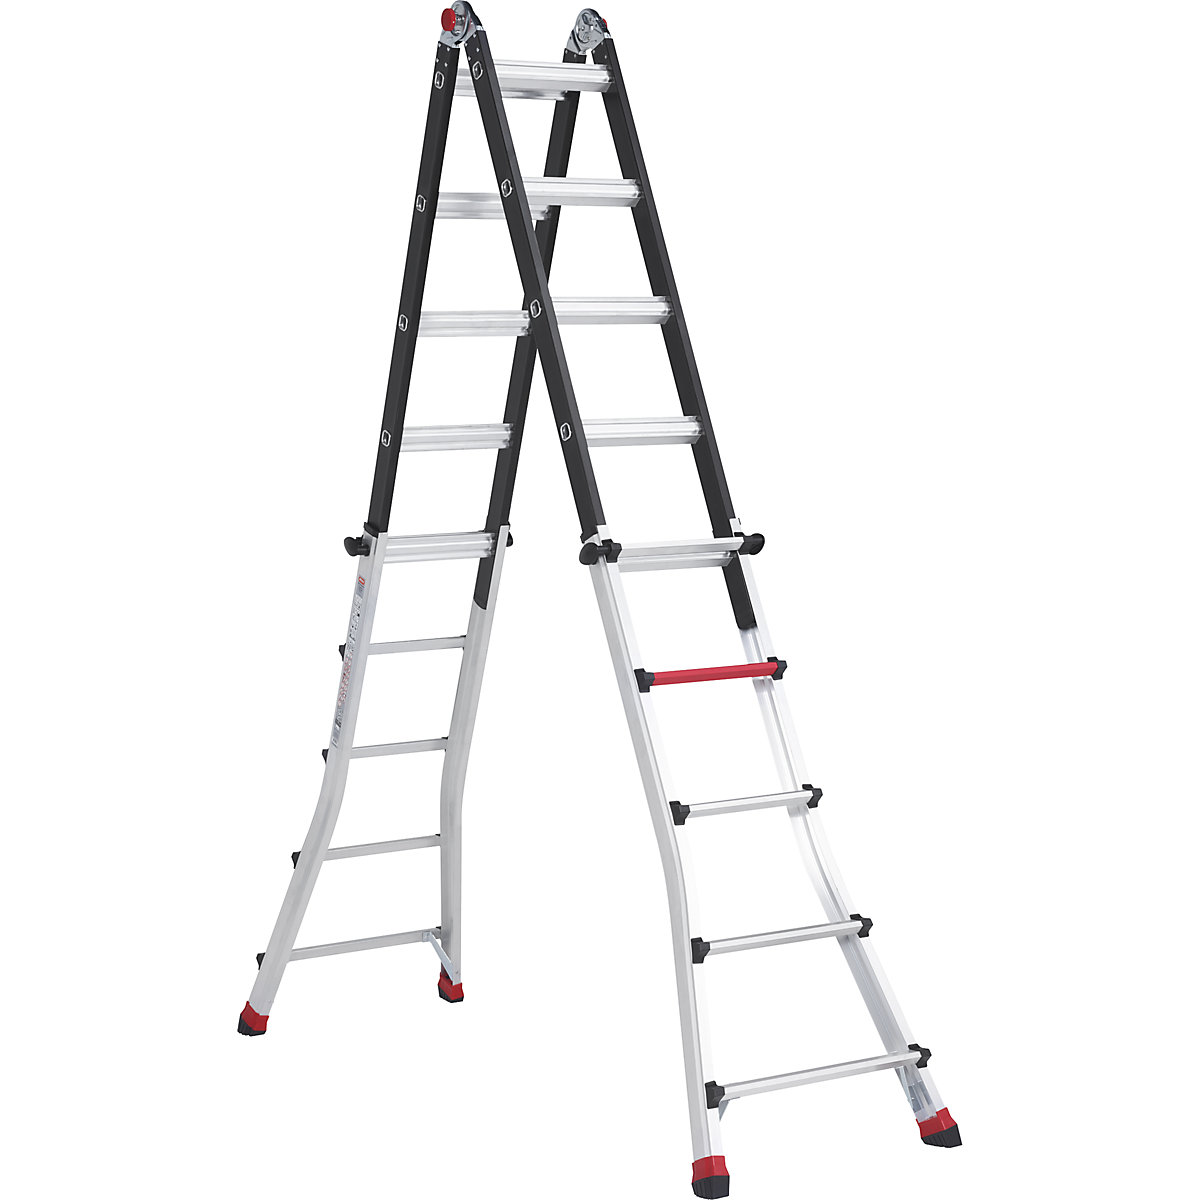 Telescopic folding ladder – Altrex, can be used as a step ladder or lean to ladder, 4 x 5 rungs-11